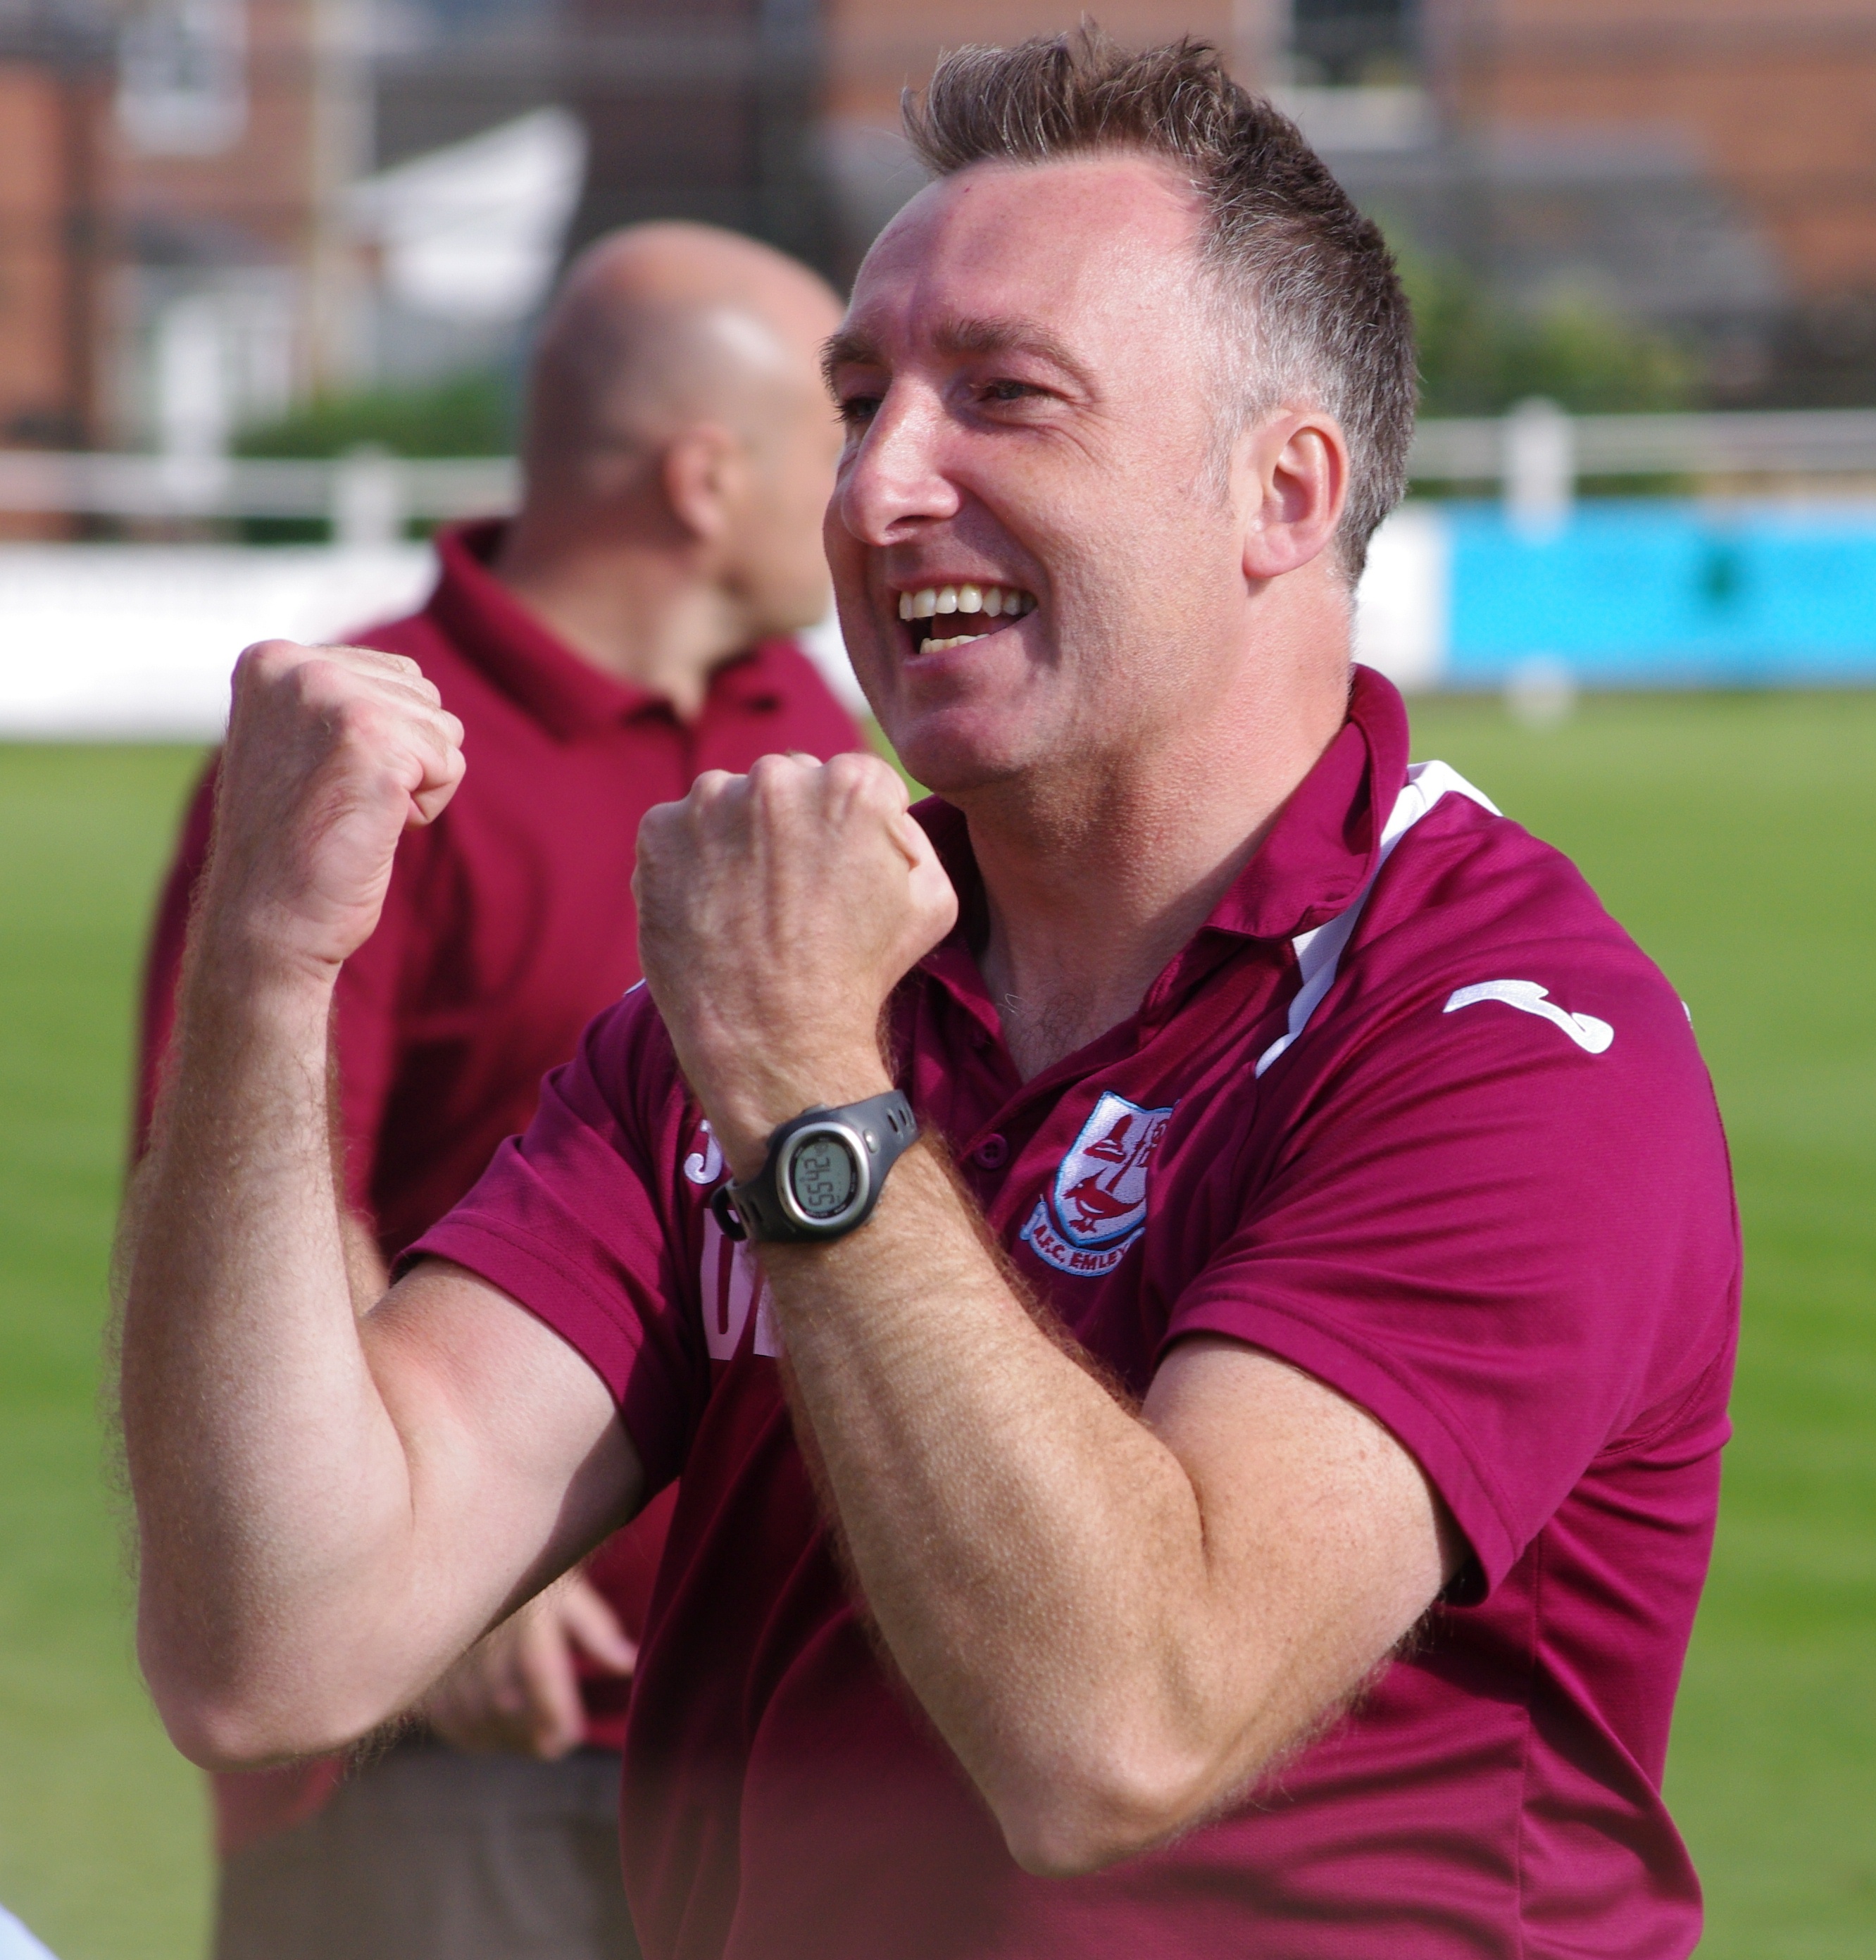 Darren Hepworth was sacked and then reinstated as AFC Emley